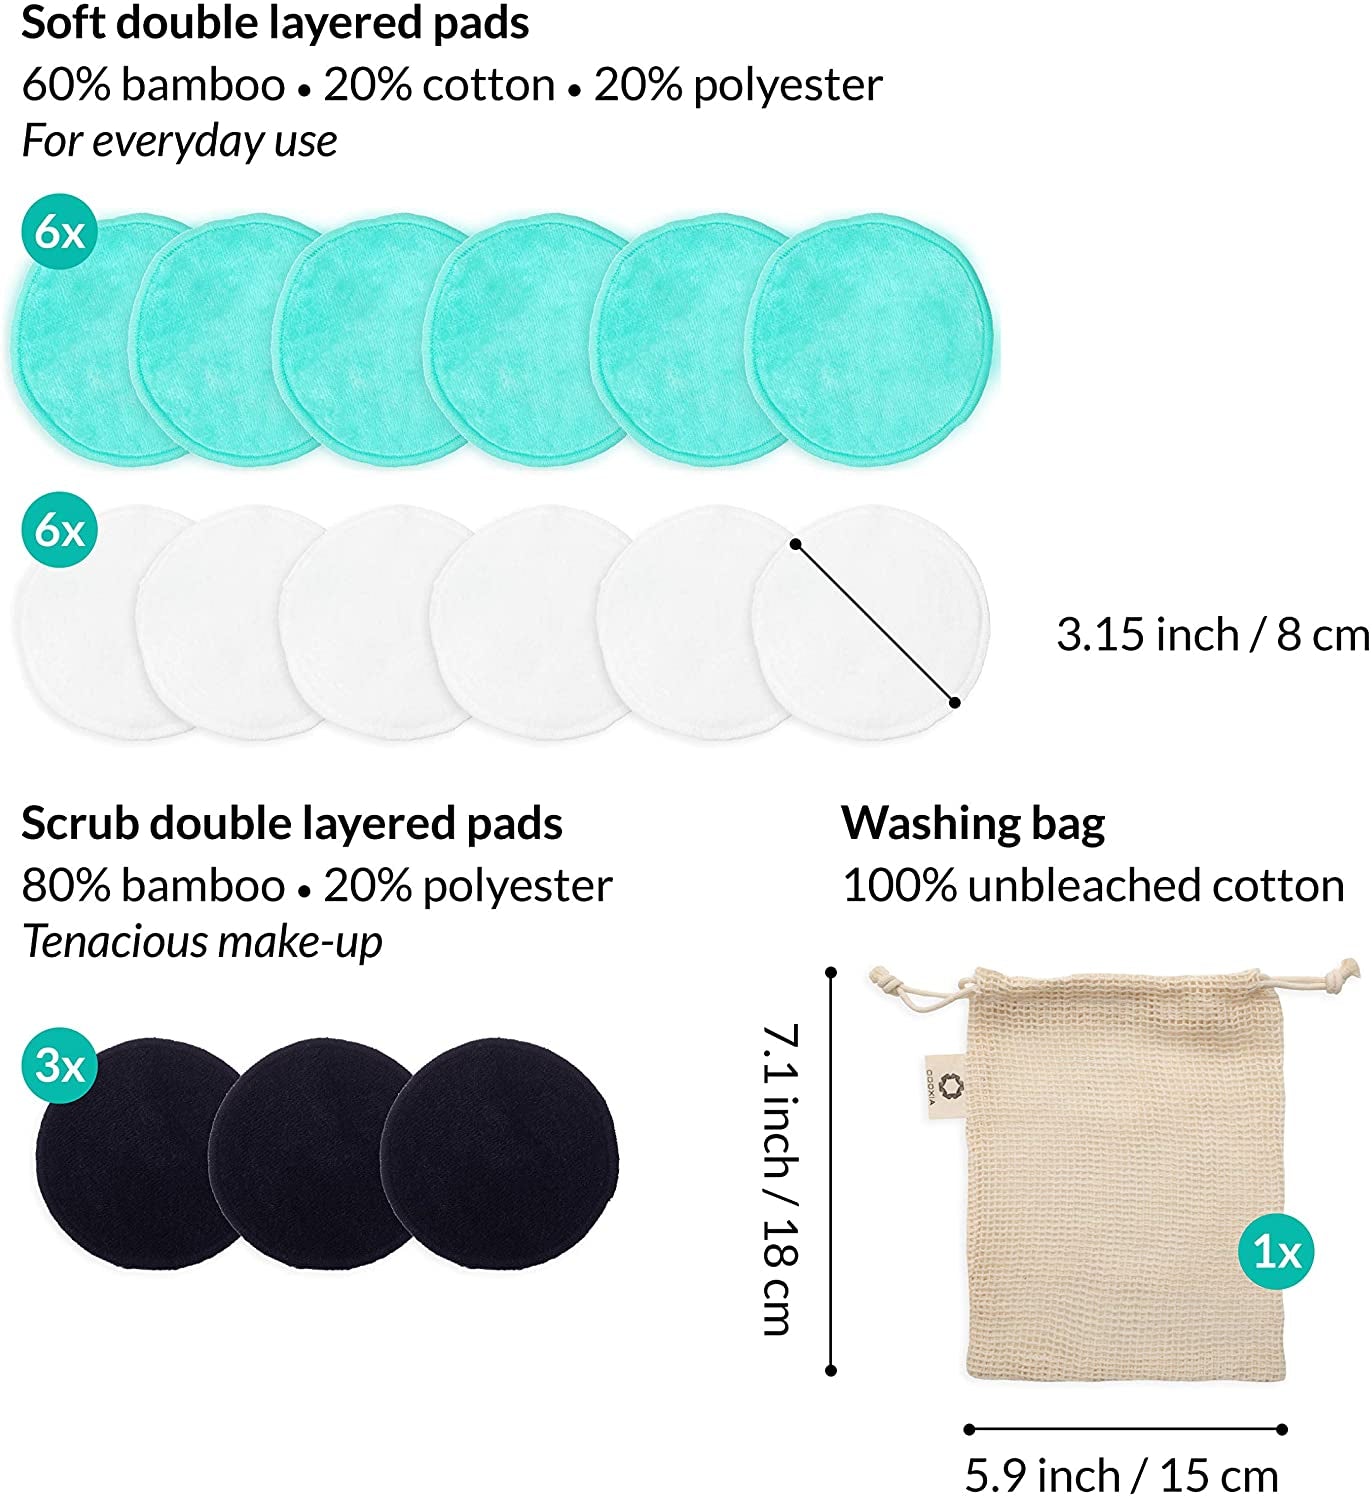 15 Reusable Makeup Remover Pads | Eco Friendly & Zero Waste Cotton Rounds | Beauty Products | Natural & Organic Face Pads with Laundry Bag | Soft for All Skin Types | Bamboo Wipes for Facial Cleansing